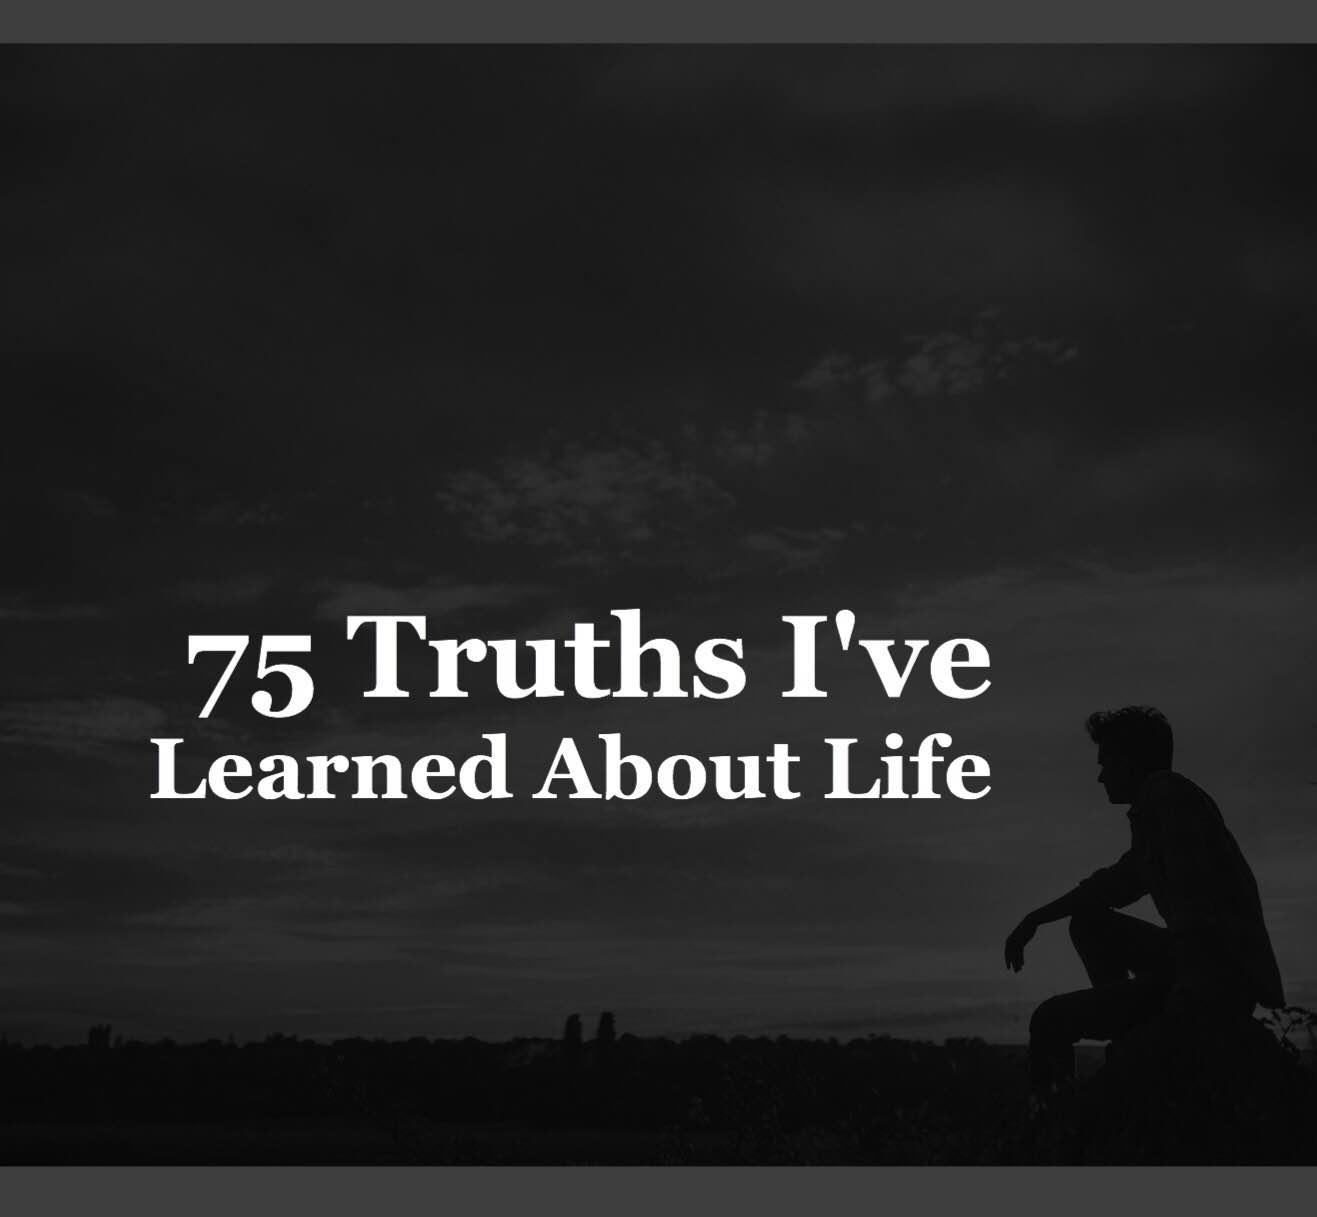 75 Truths I've Learned About Life